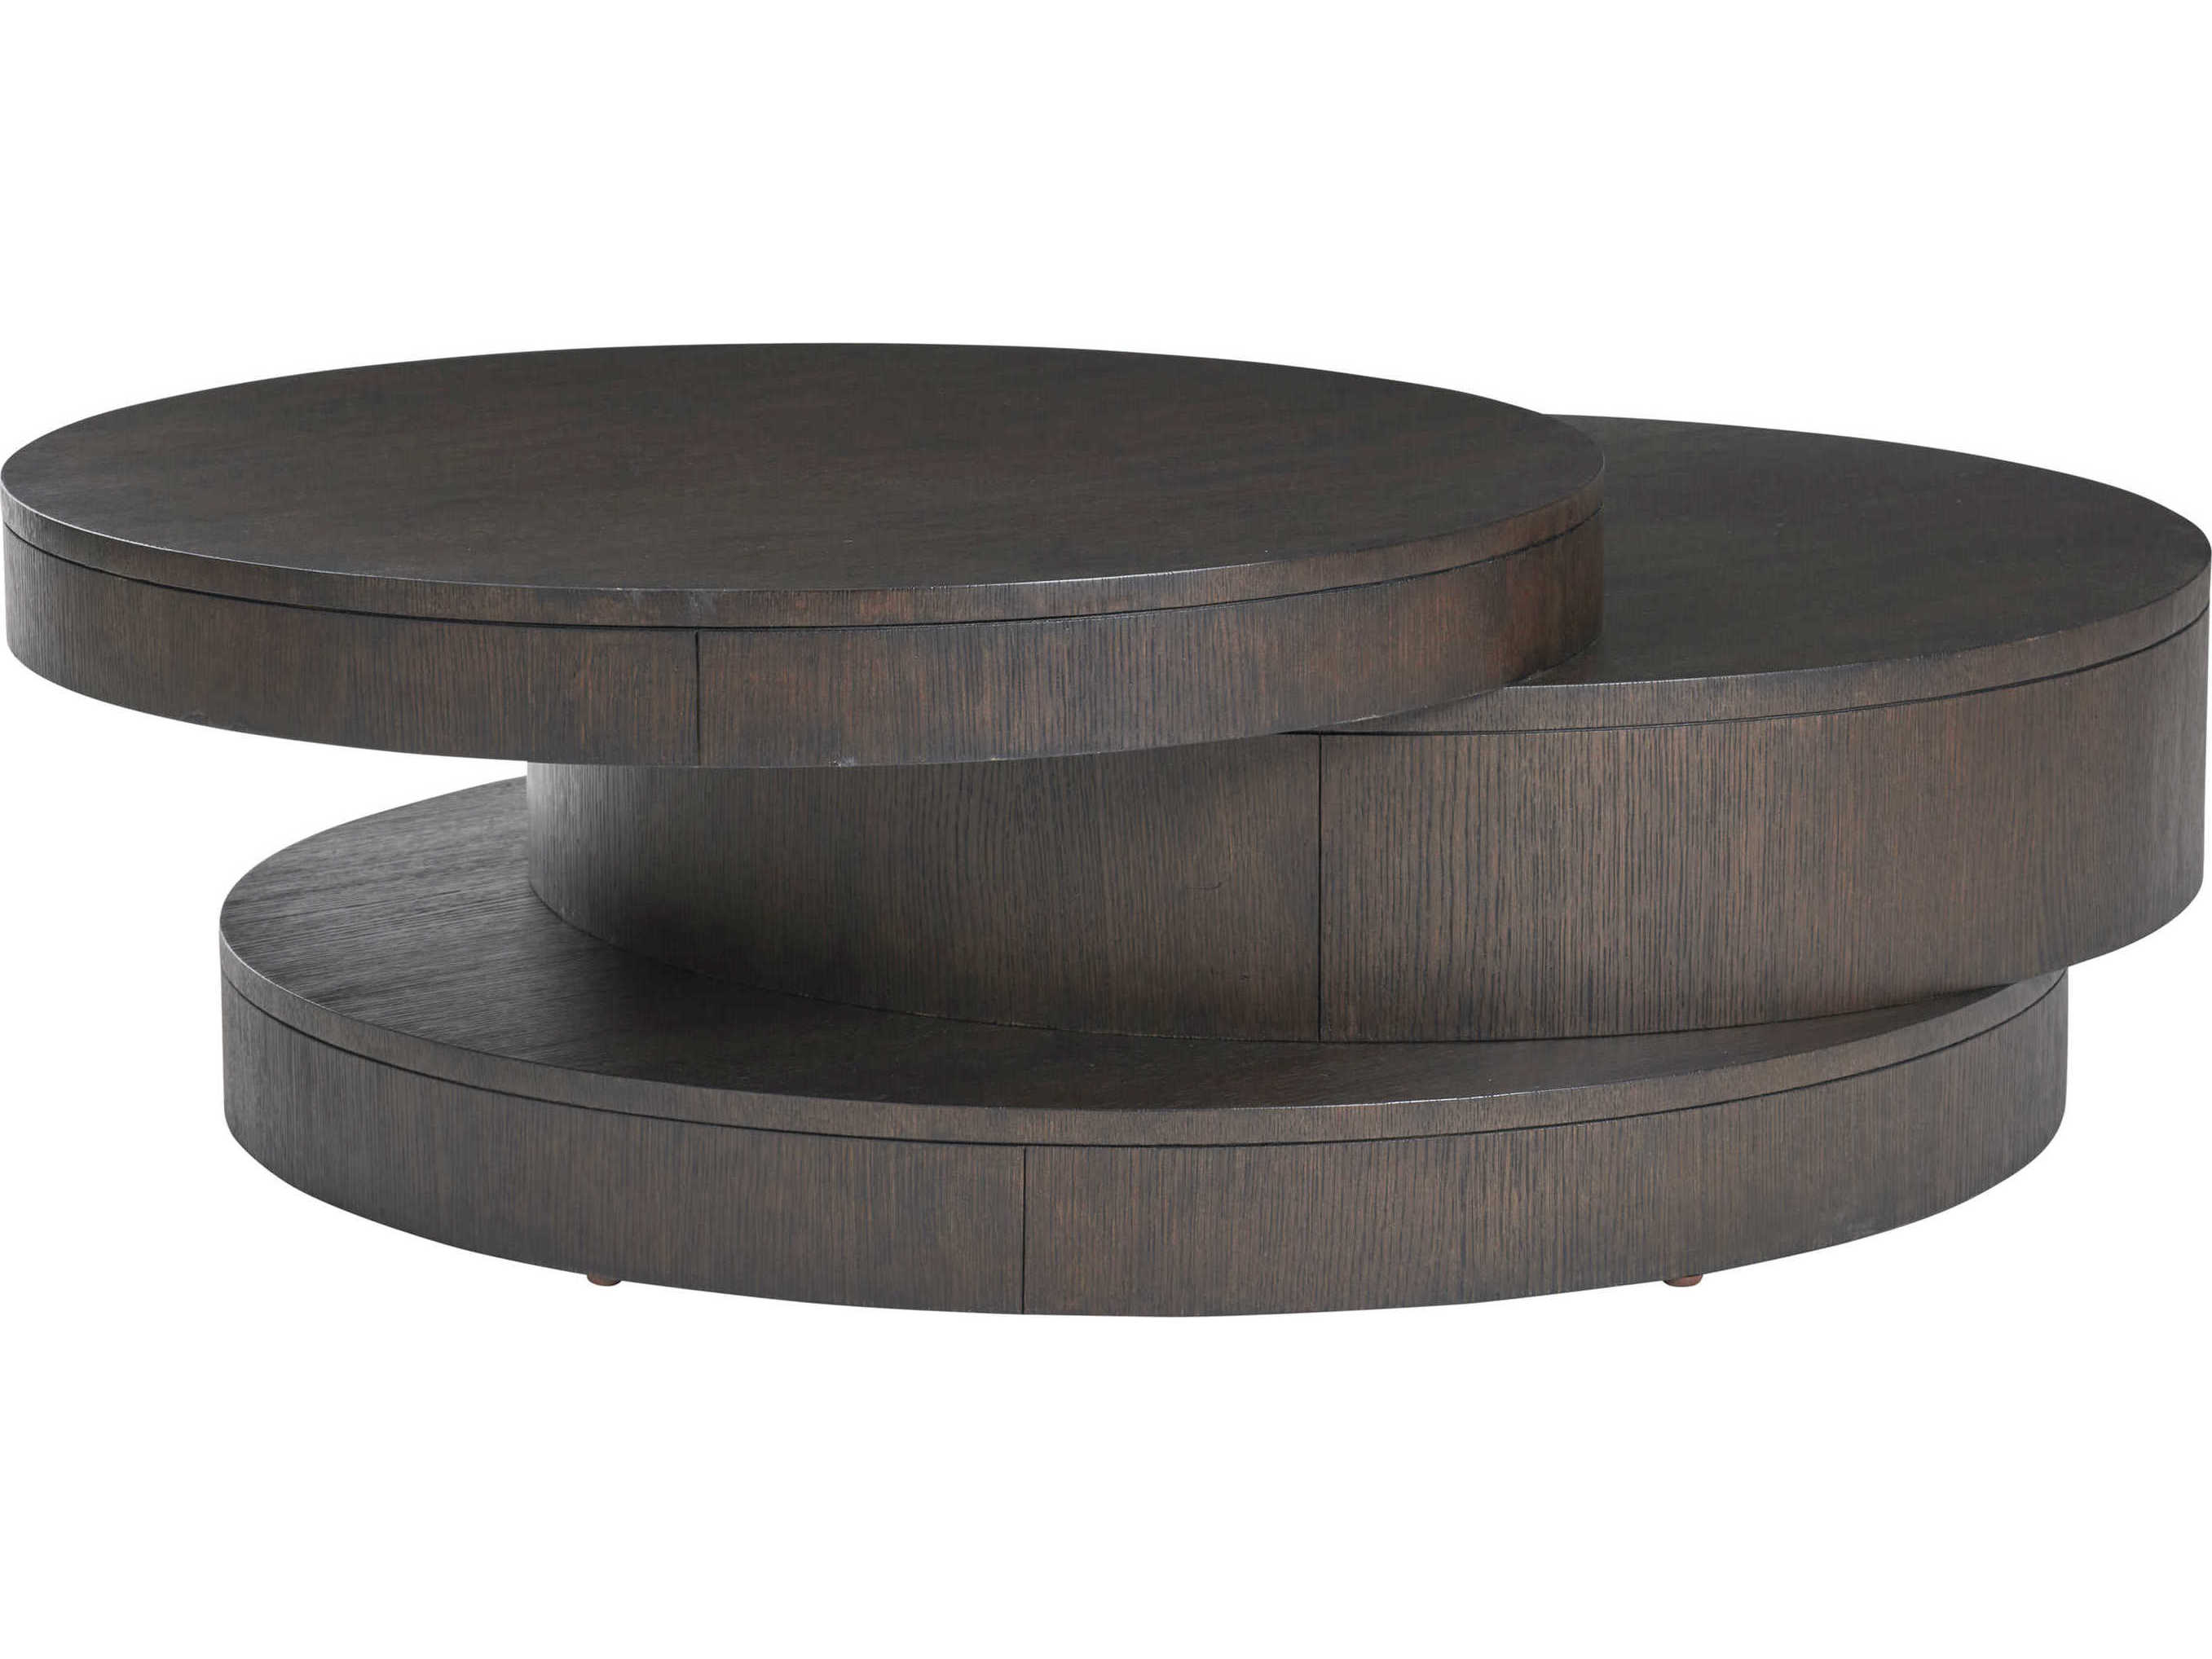 Barclay Butera Park City 52 Wide, Barclay Round Travertine Coffee Table